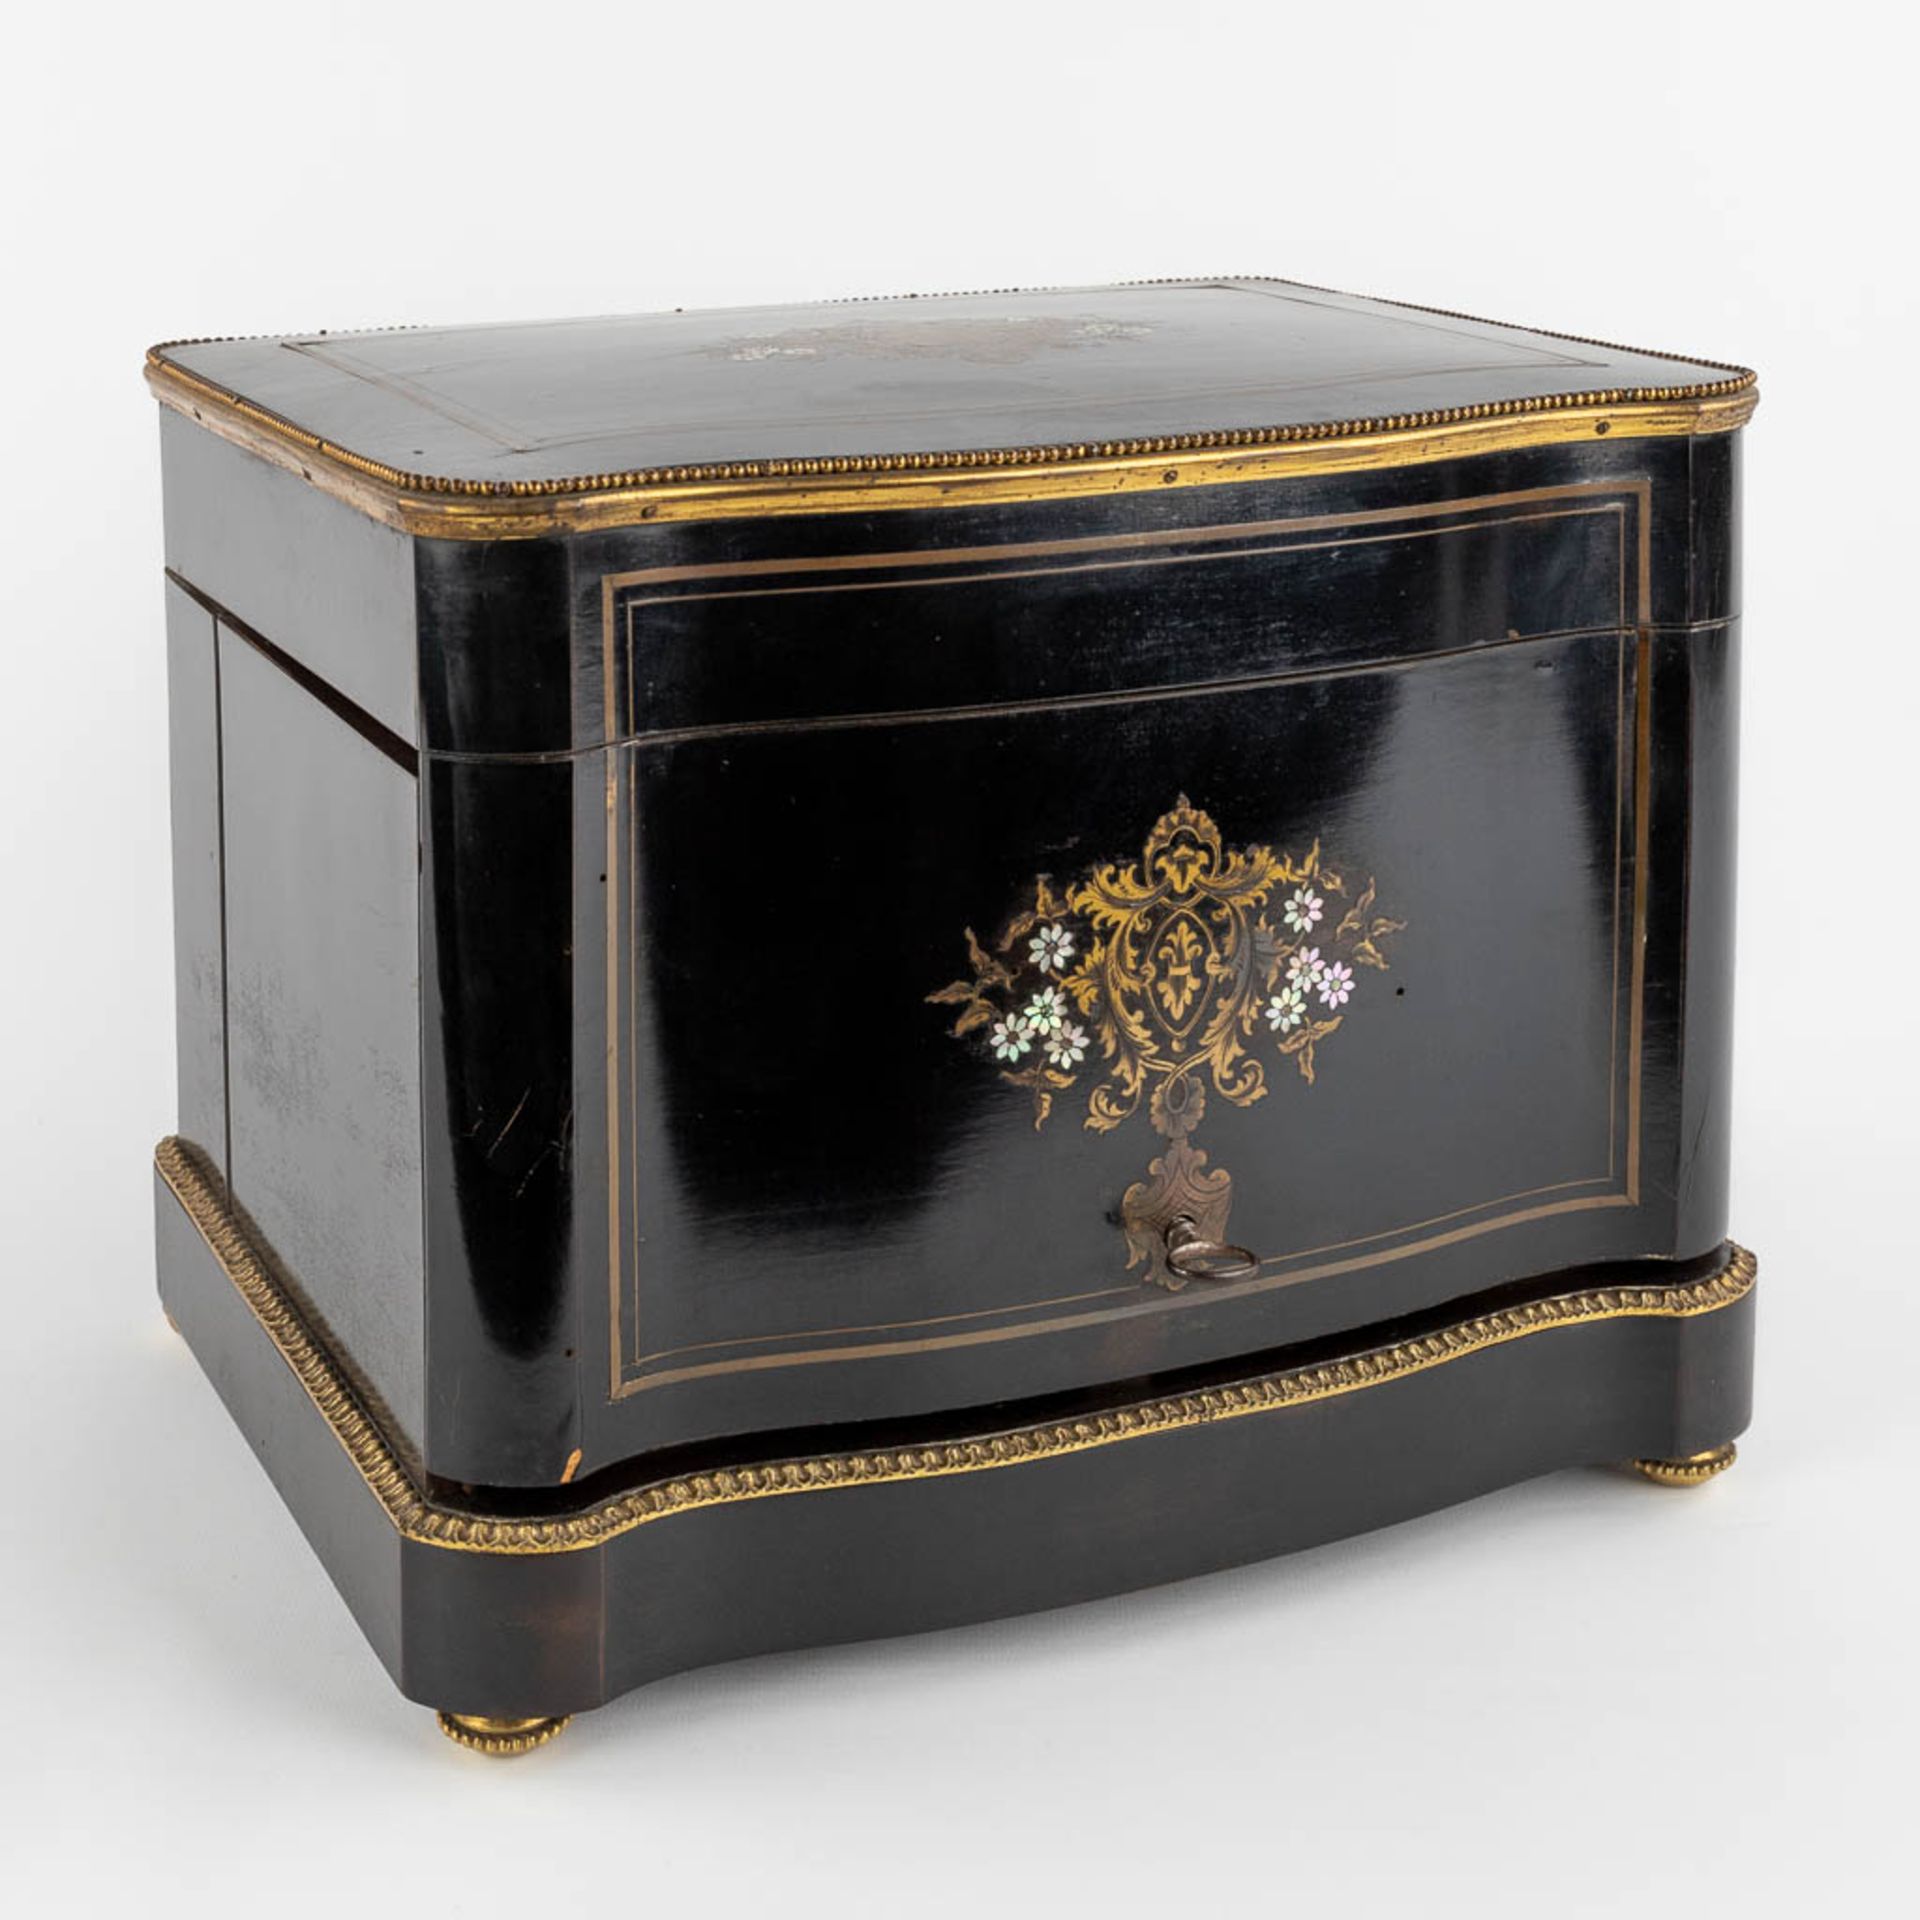 An antique Cave-à-liqueur, liquor box, ebonised wood inlaid with mother of pearl and copper. 19th C. - Image 3 of 16